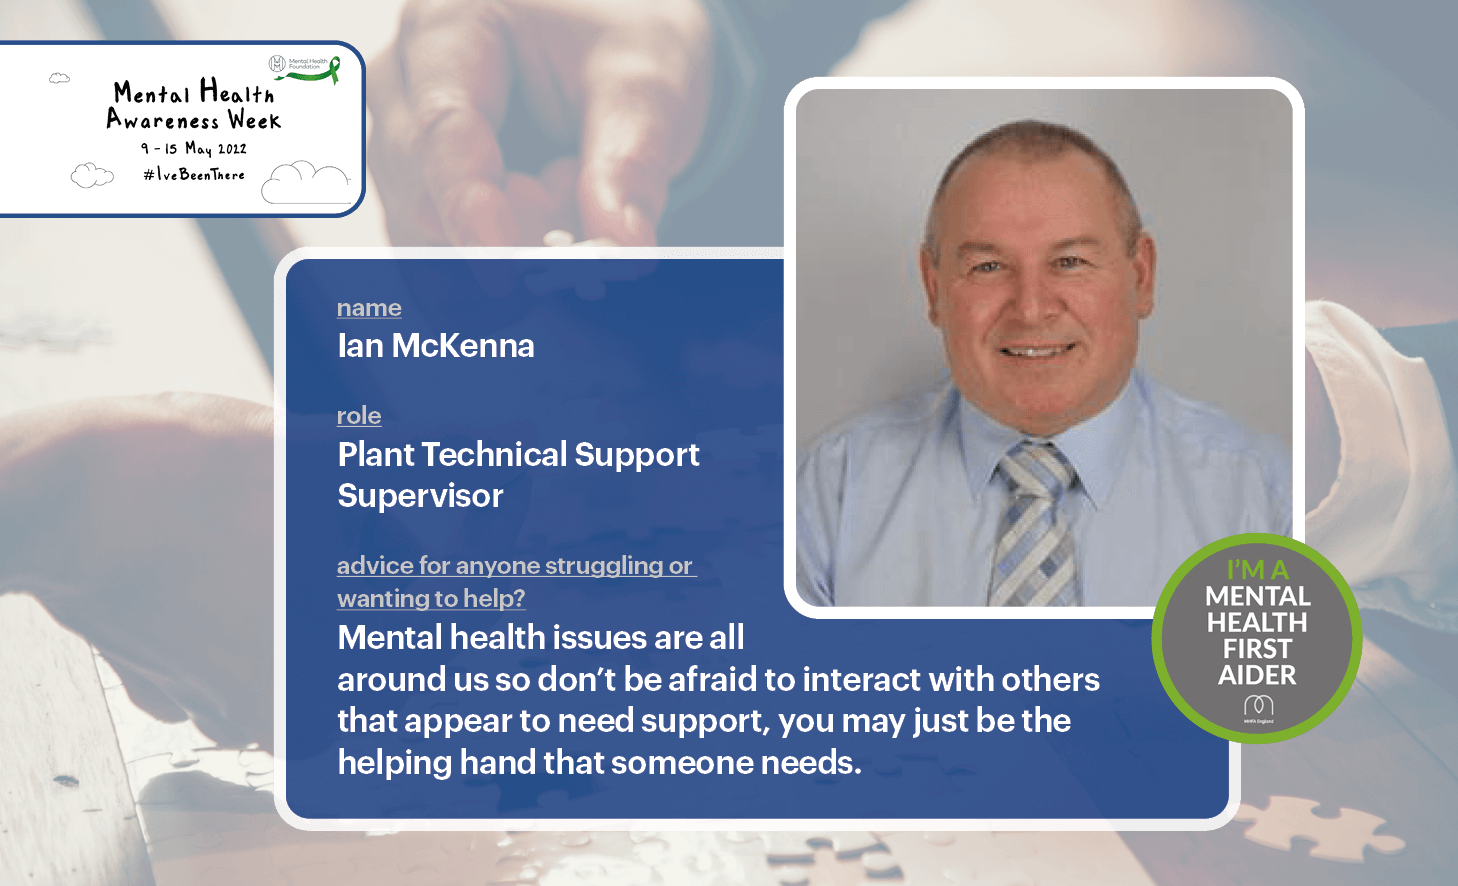 Advice from our Mental Health First Aiders - Ian McKenna, Plant Technical Support